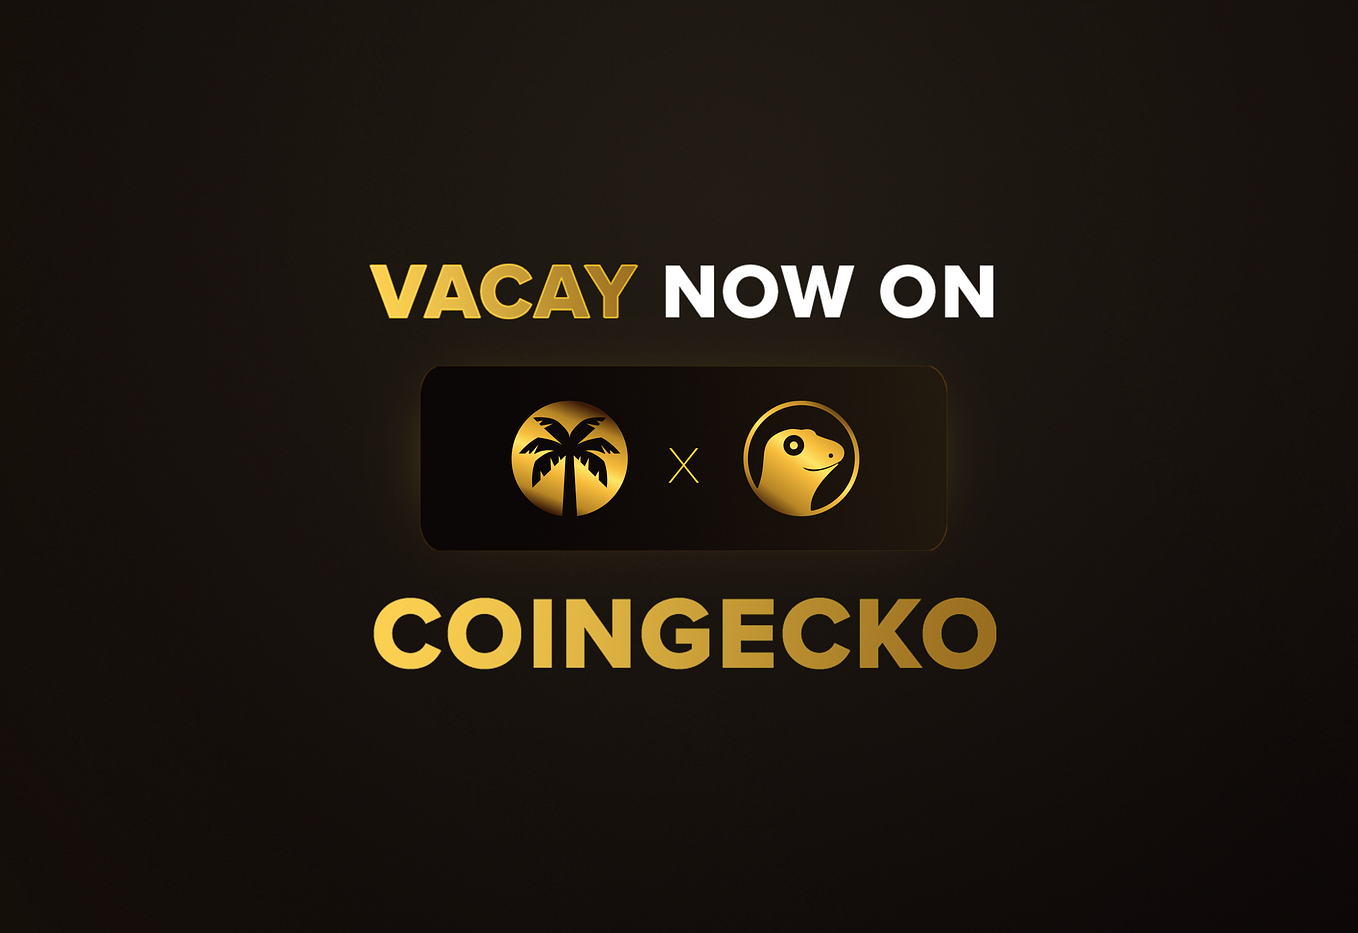 Vacay : Now Listed on CoinGecko